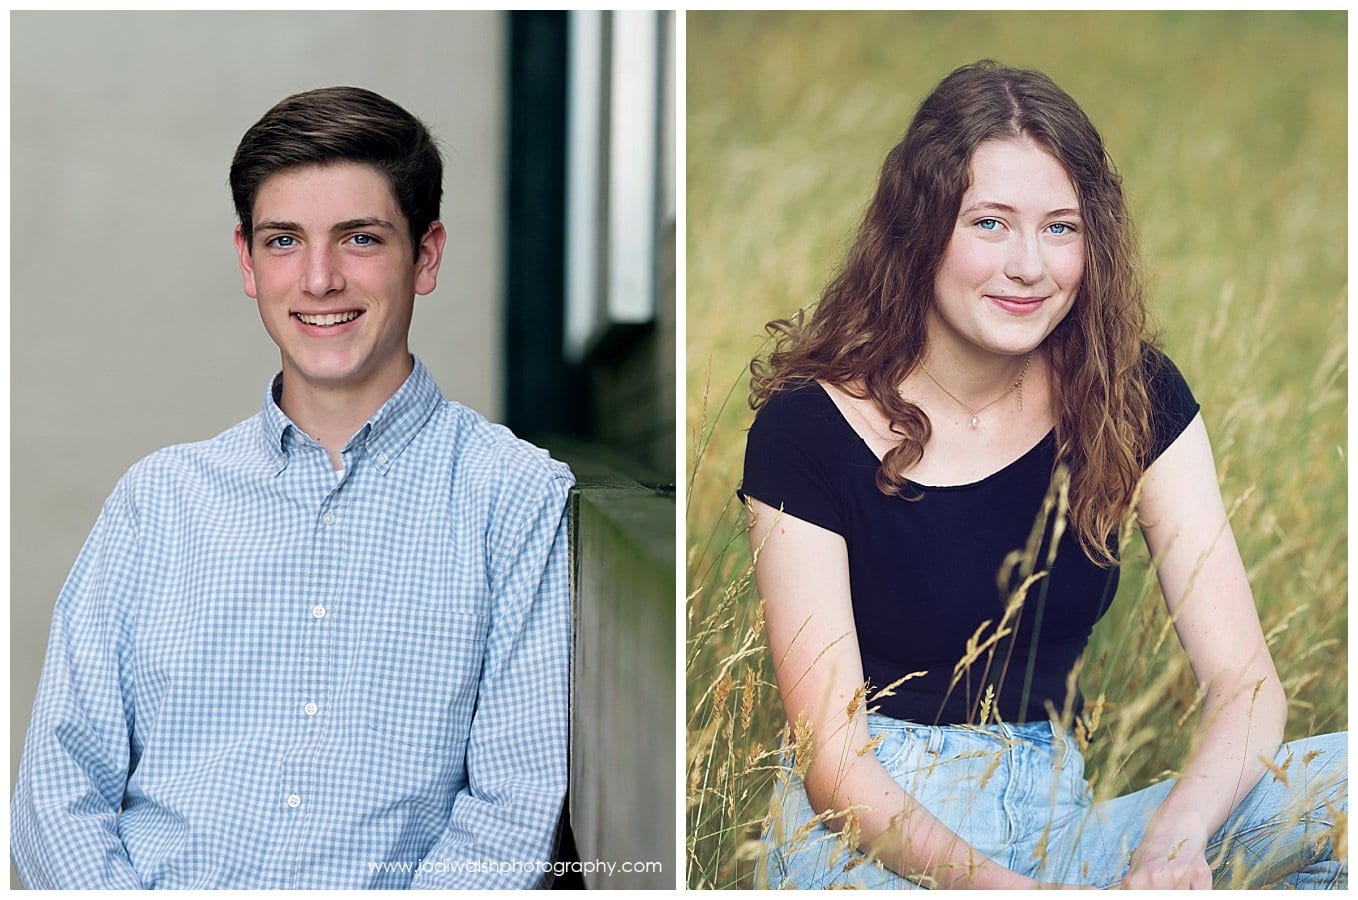 images of two senior portrait headshots.  The first image is of a senior guy, wearing a blue button down dress shirt and leaning against a wall.  the second image is of a senior girl wearing a black t-shirt and bluejeans.  She's sitting in a field of tall grasses.